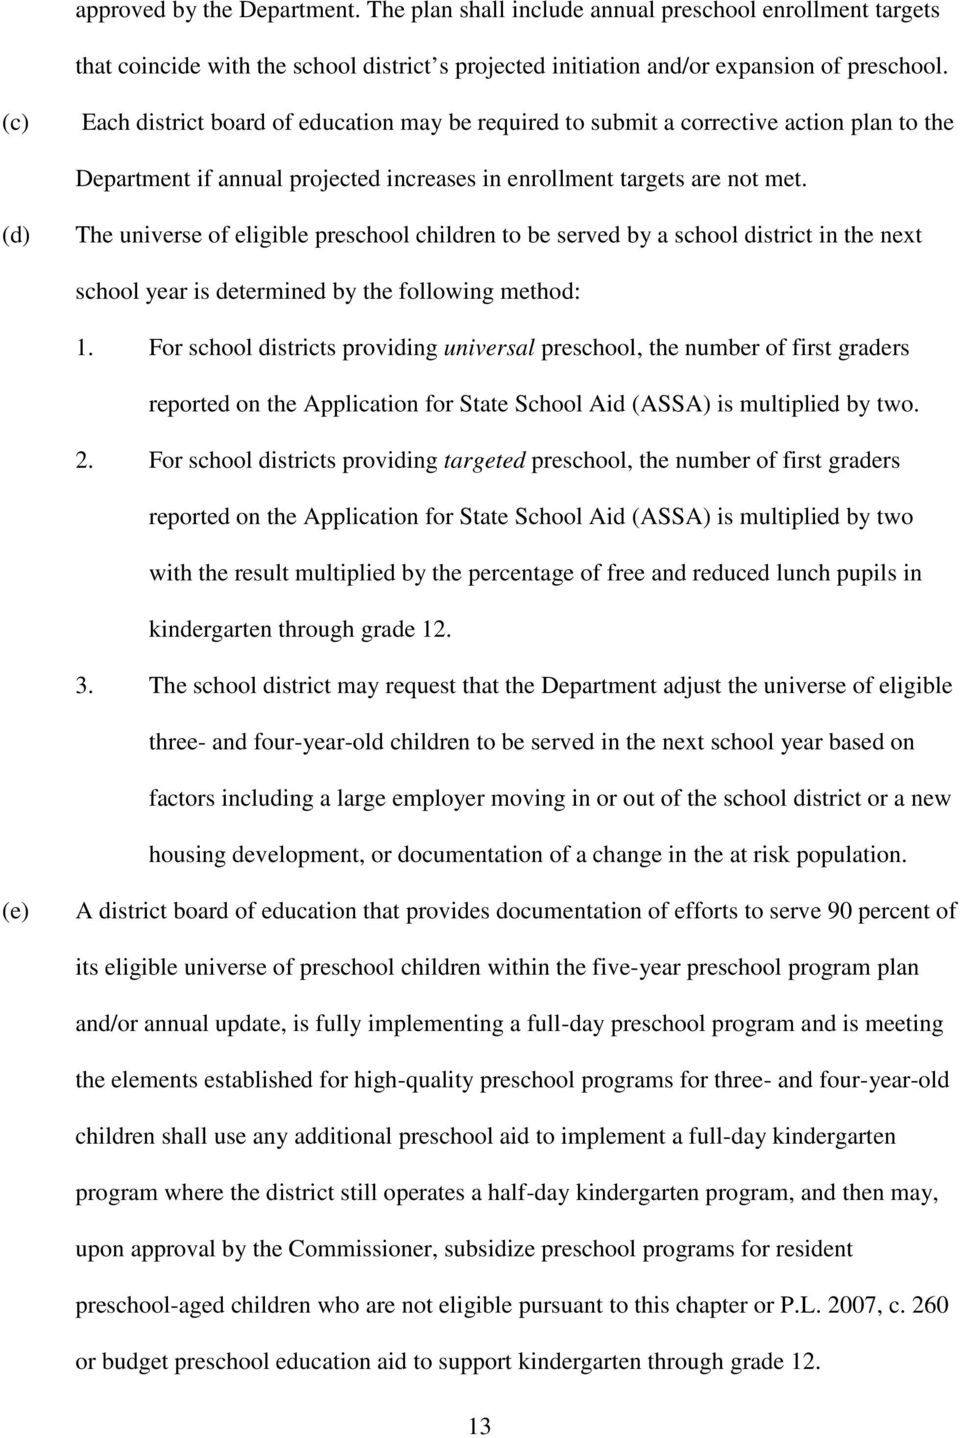 (d) The universe of eligible preschool children to be served by a school district in the next school year is determined by the following method: 1.